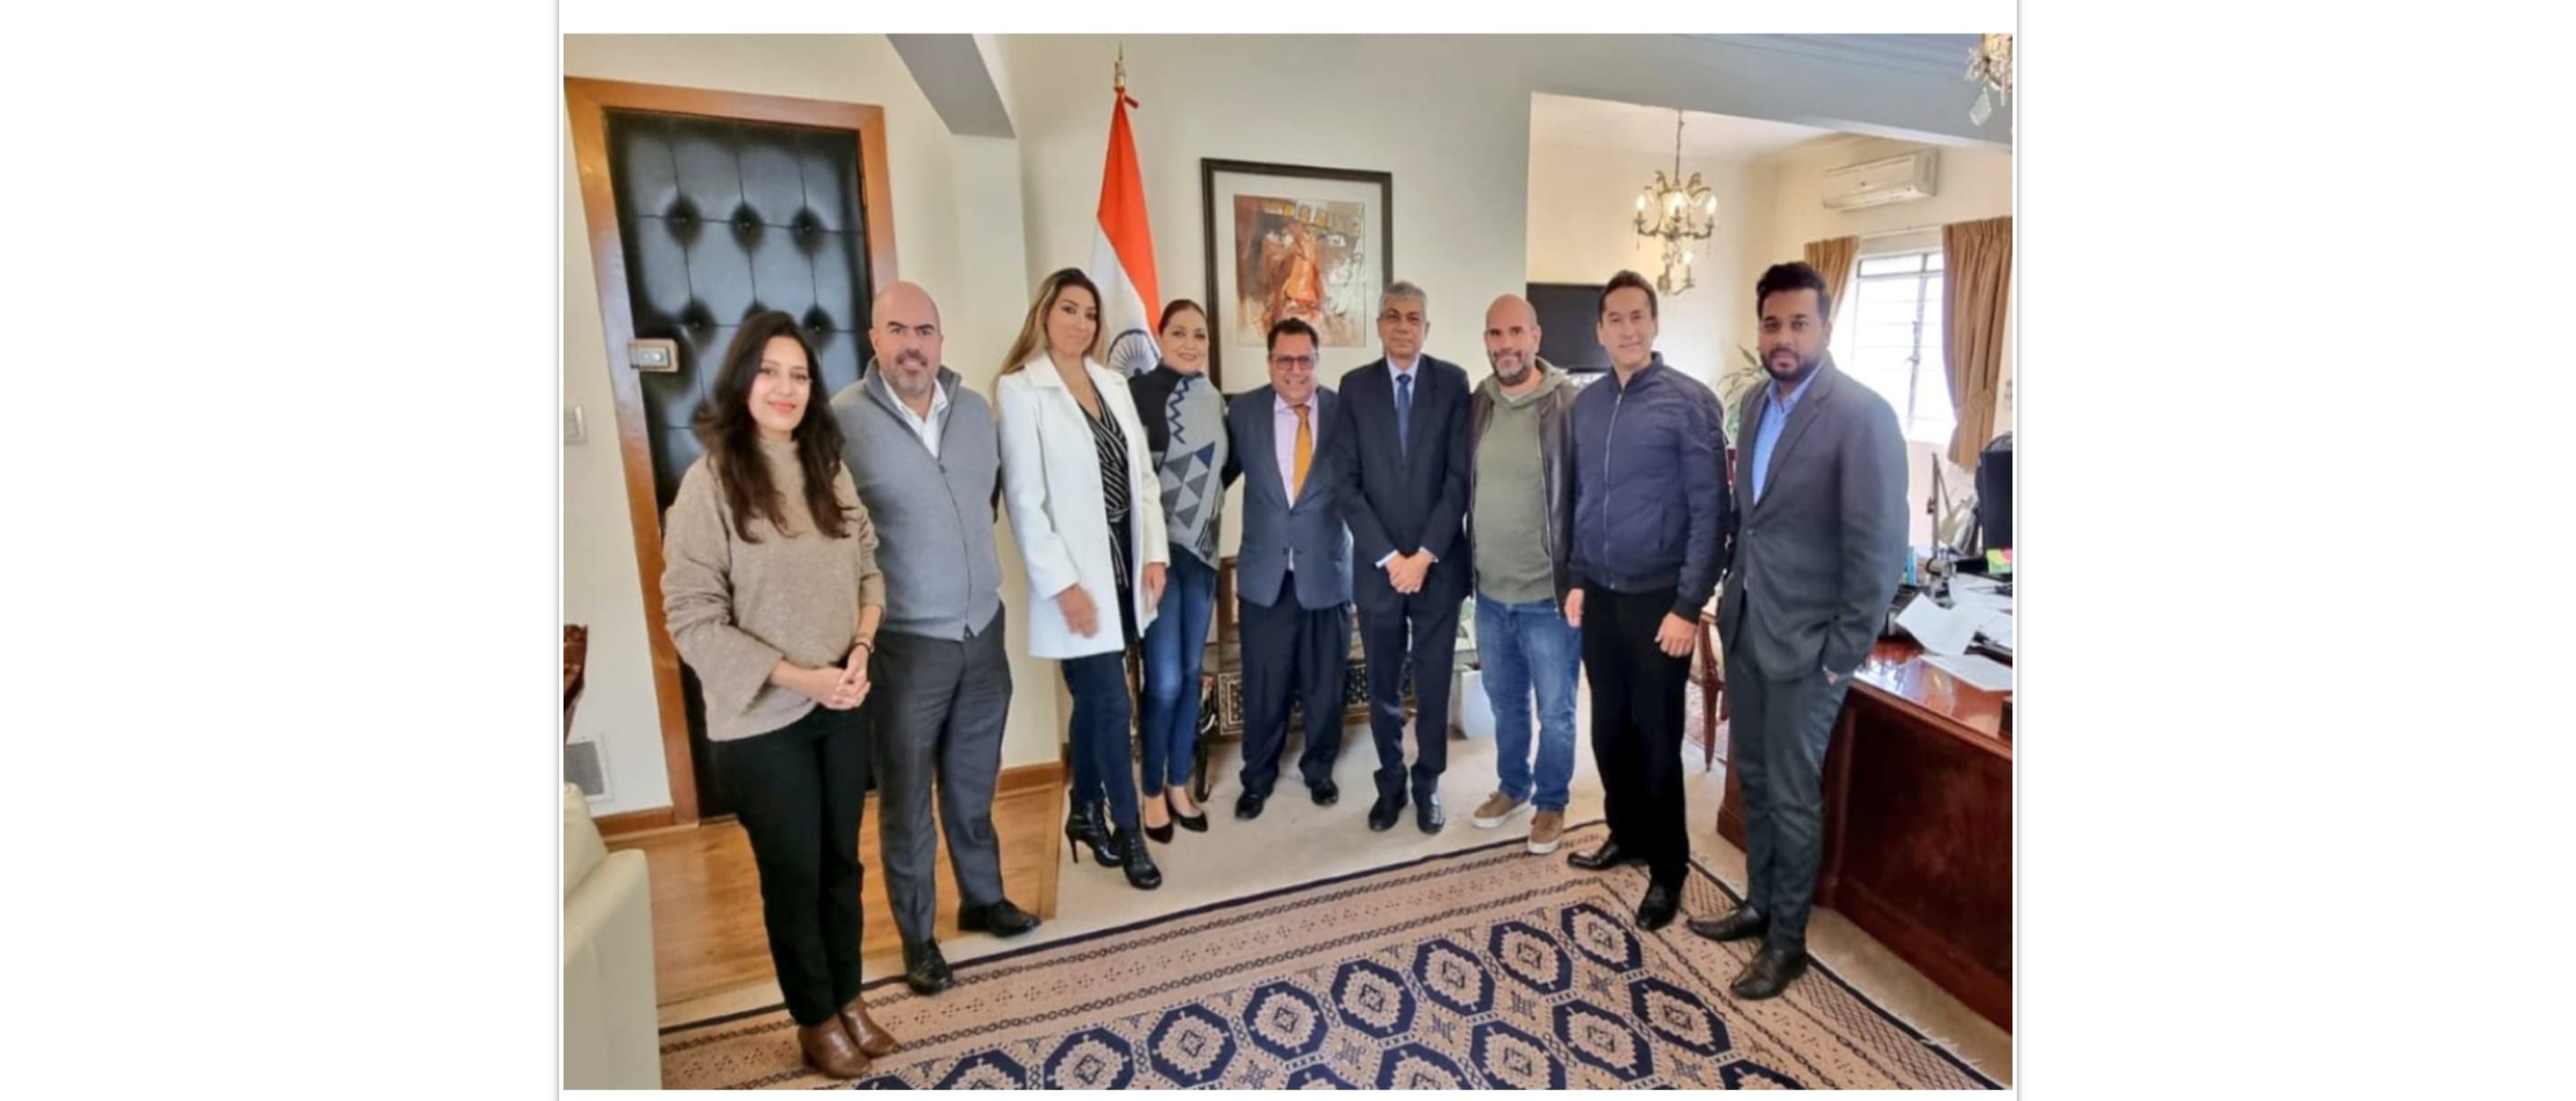  <div style="fcolor: #fff; font-weight: 600; font-size: 1.5em;">
<p style="font-size: 13.8px;">Ambassador Pankaj Sharma and Embassy officials met with the President of the World Summit of Knowledge & the International College of Professionals-Mr. Omar Alcántara & his team, as well as with Mr. Santiago Orendain.

Discussed collaborations in organizing a business-cum-cultural event in November 2022.


<br /><span style="text-align: center;">11 October 2022</span></p>
</div>